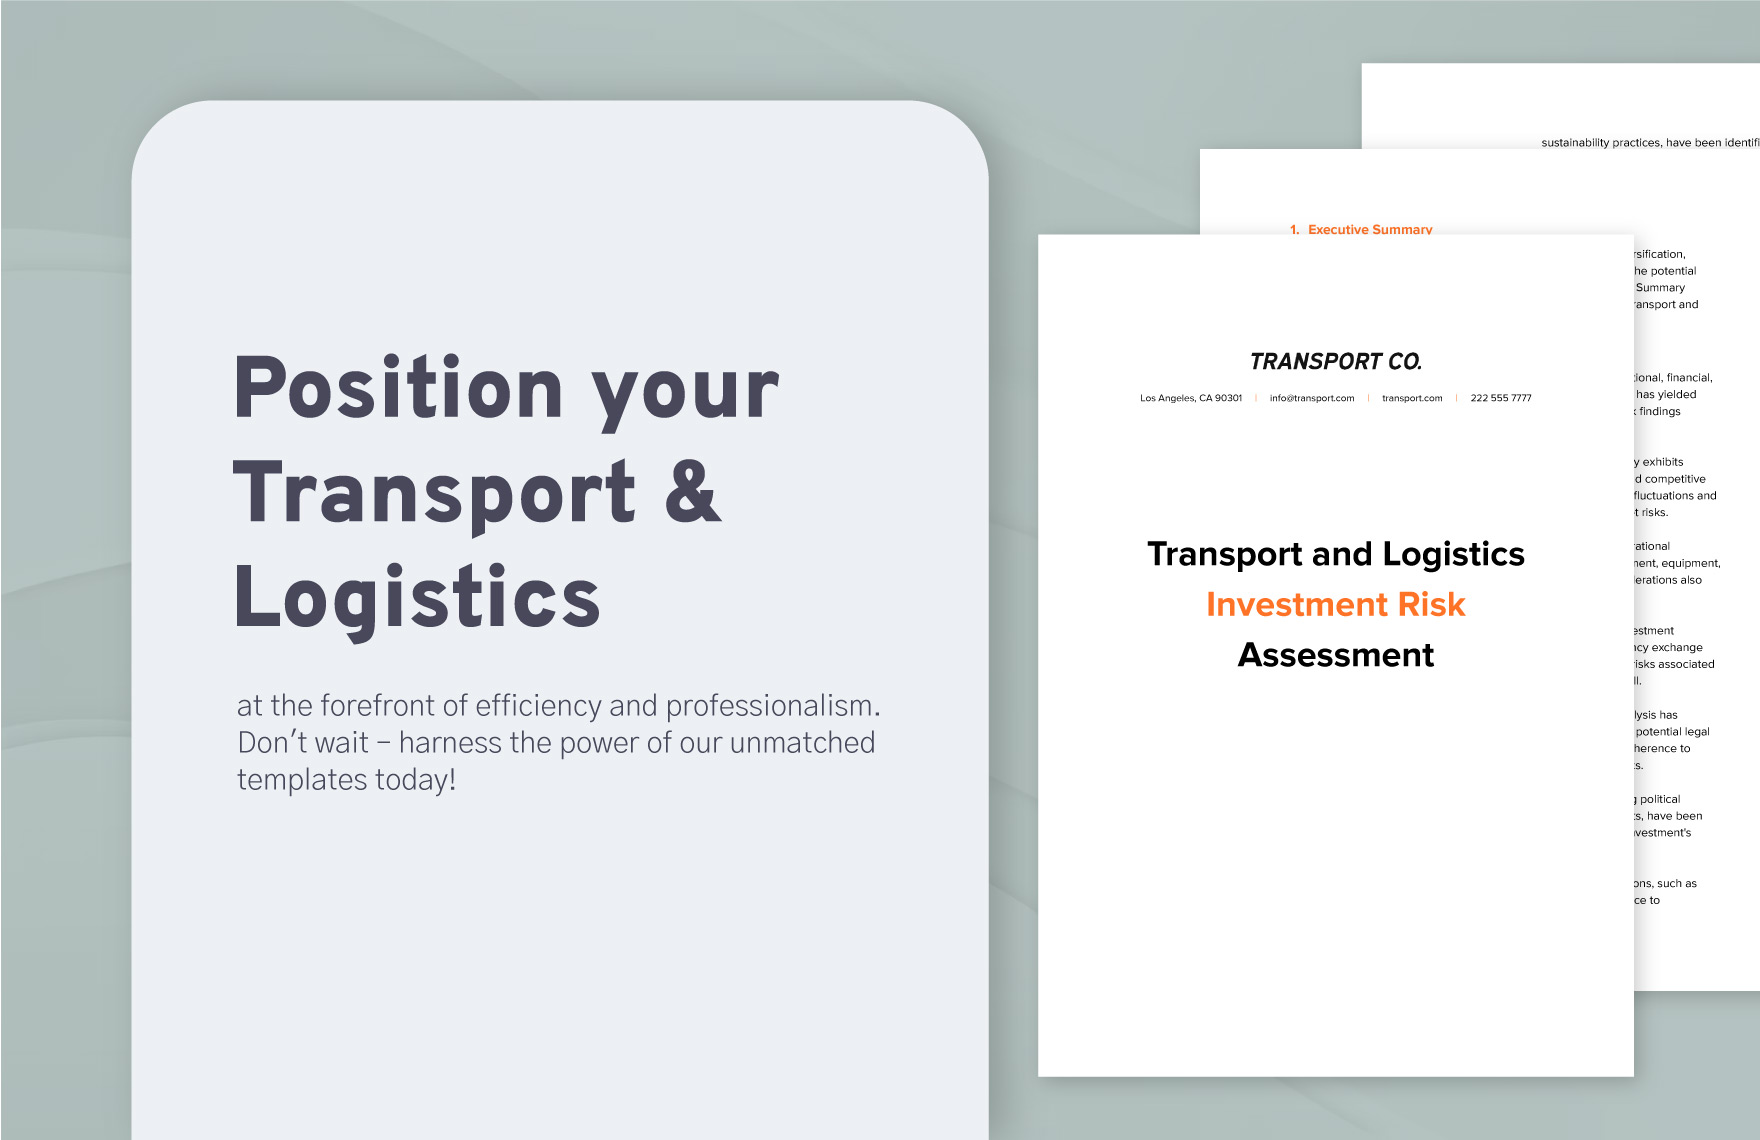 Transport and Logistics Investment Risk Assessment Template